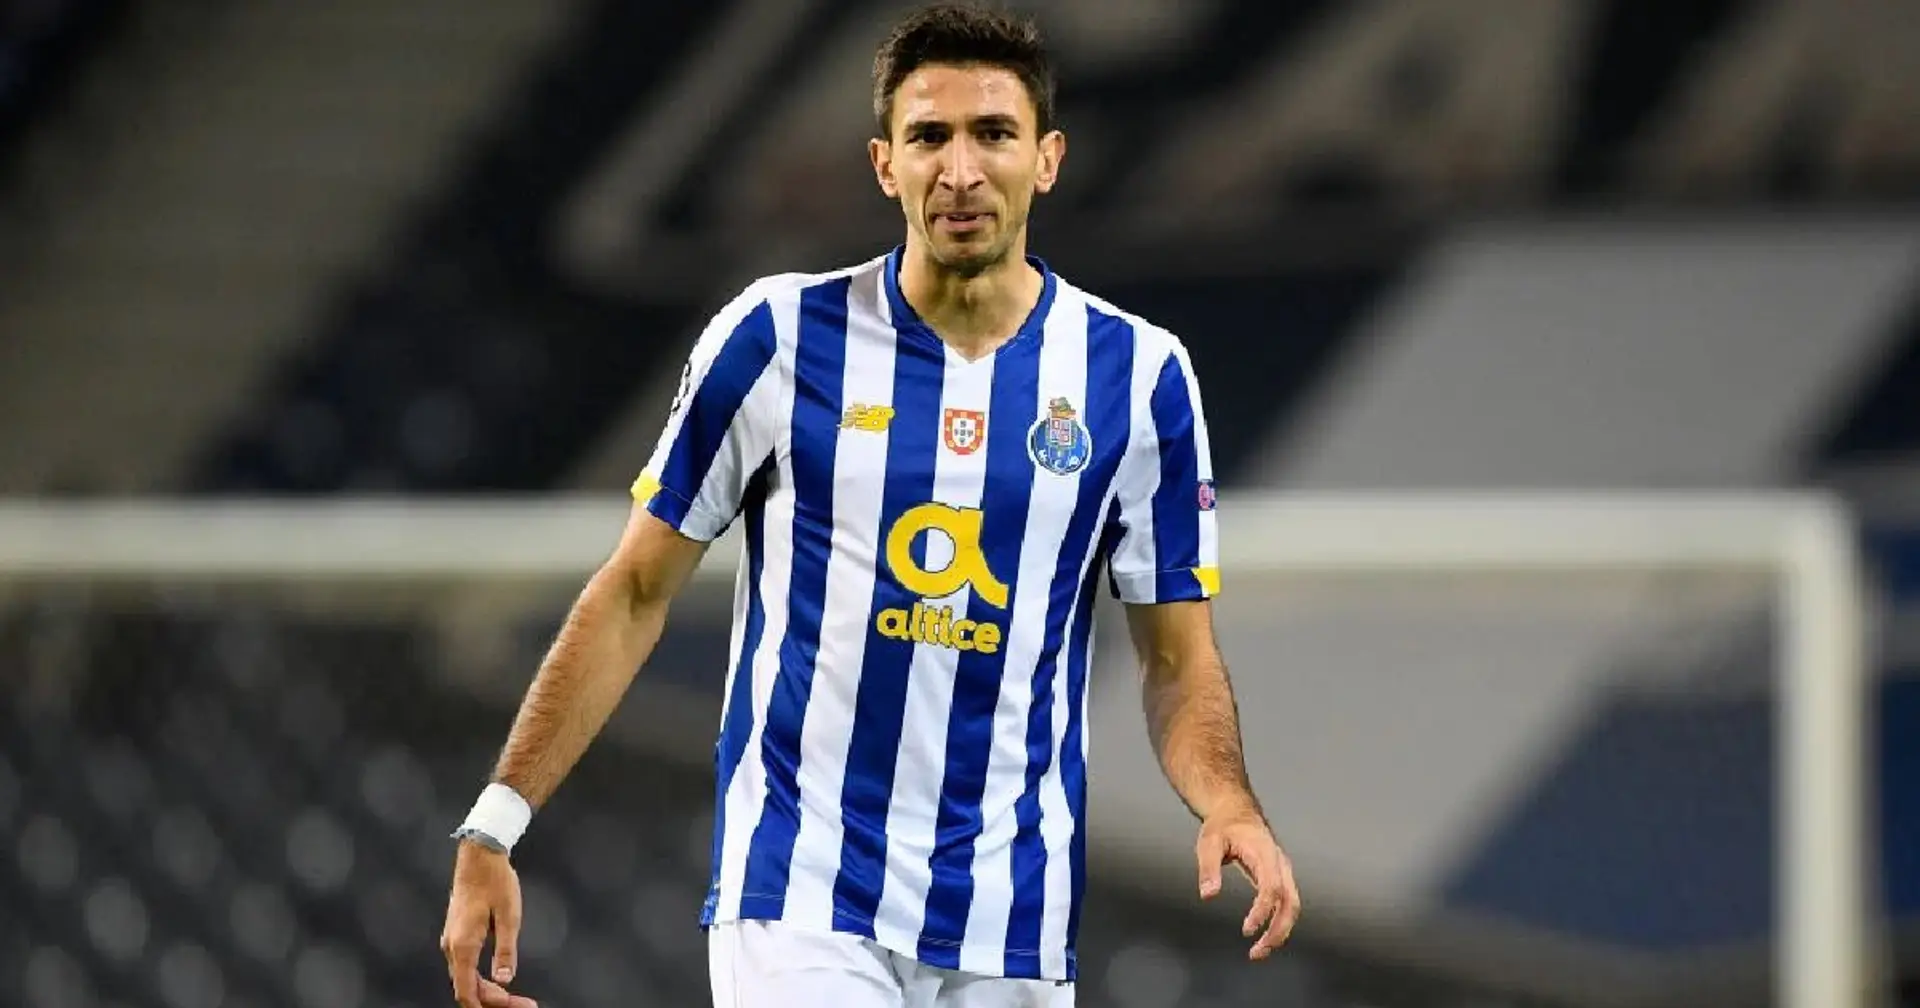 'The speed is much faster than at Hertha': Portuguese football expert breaks down Grujic's struggles at Porto